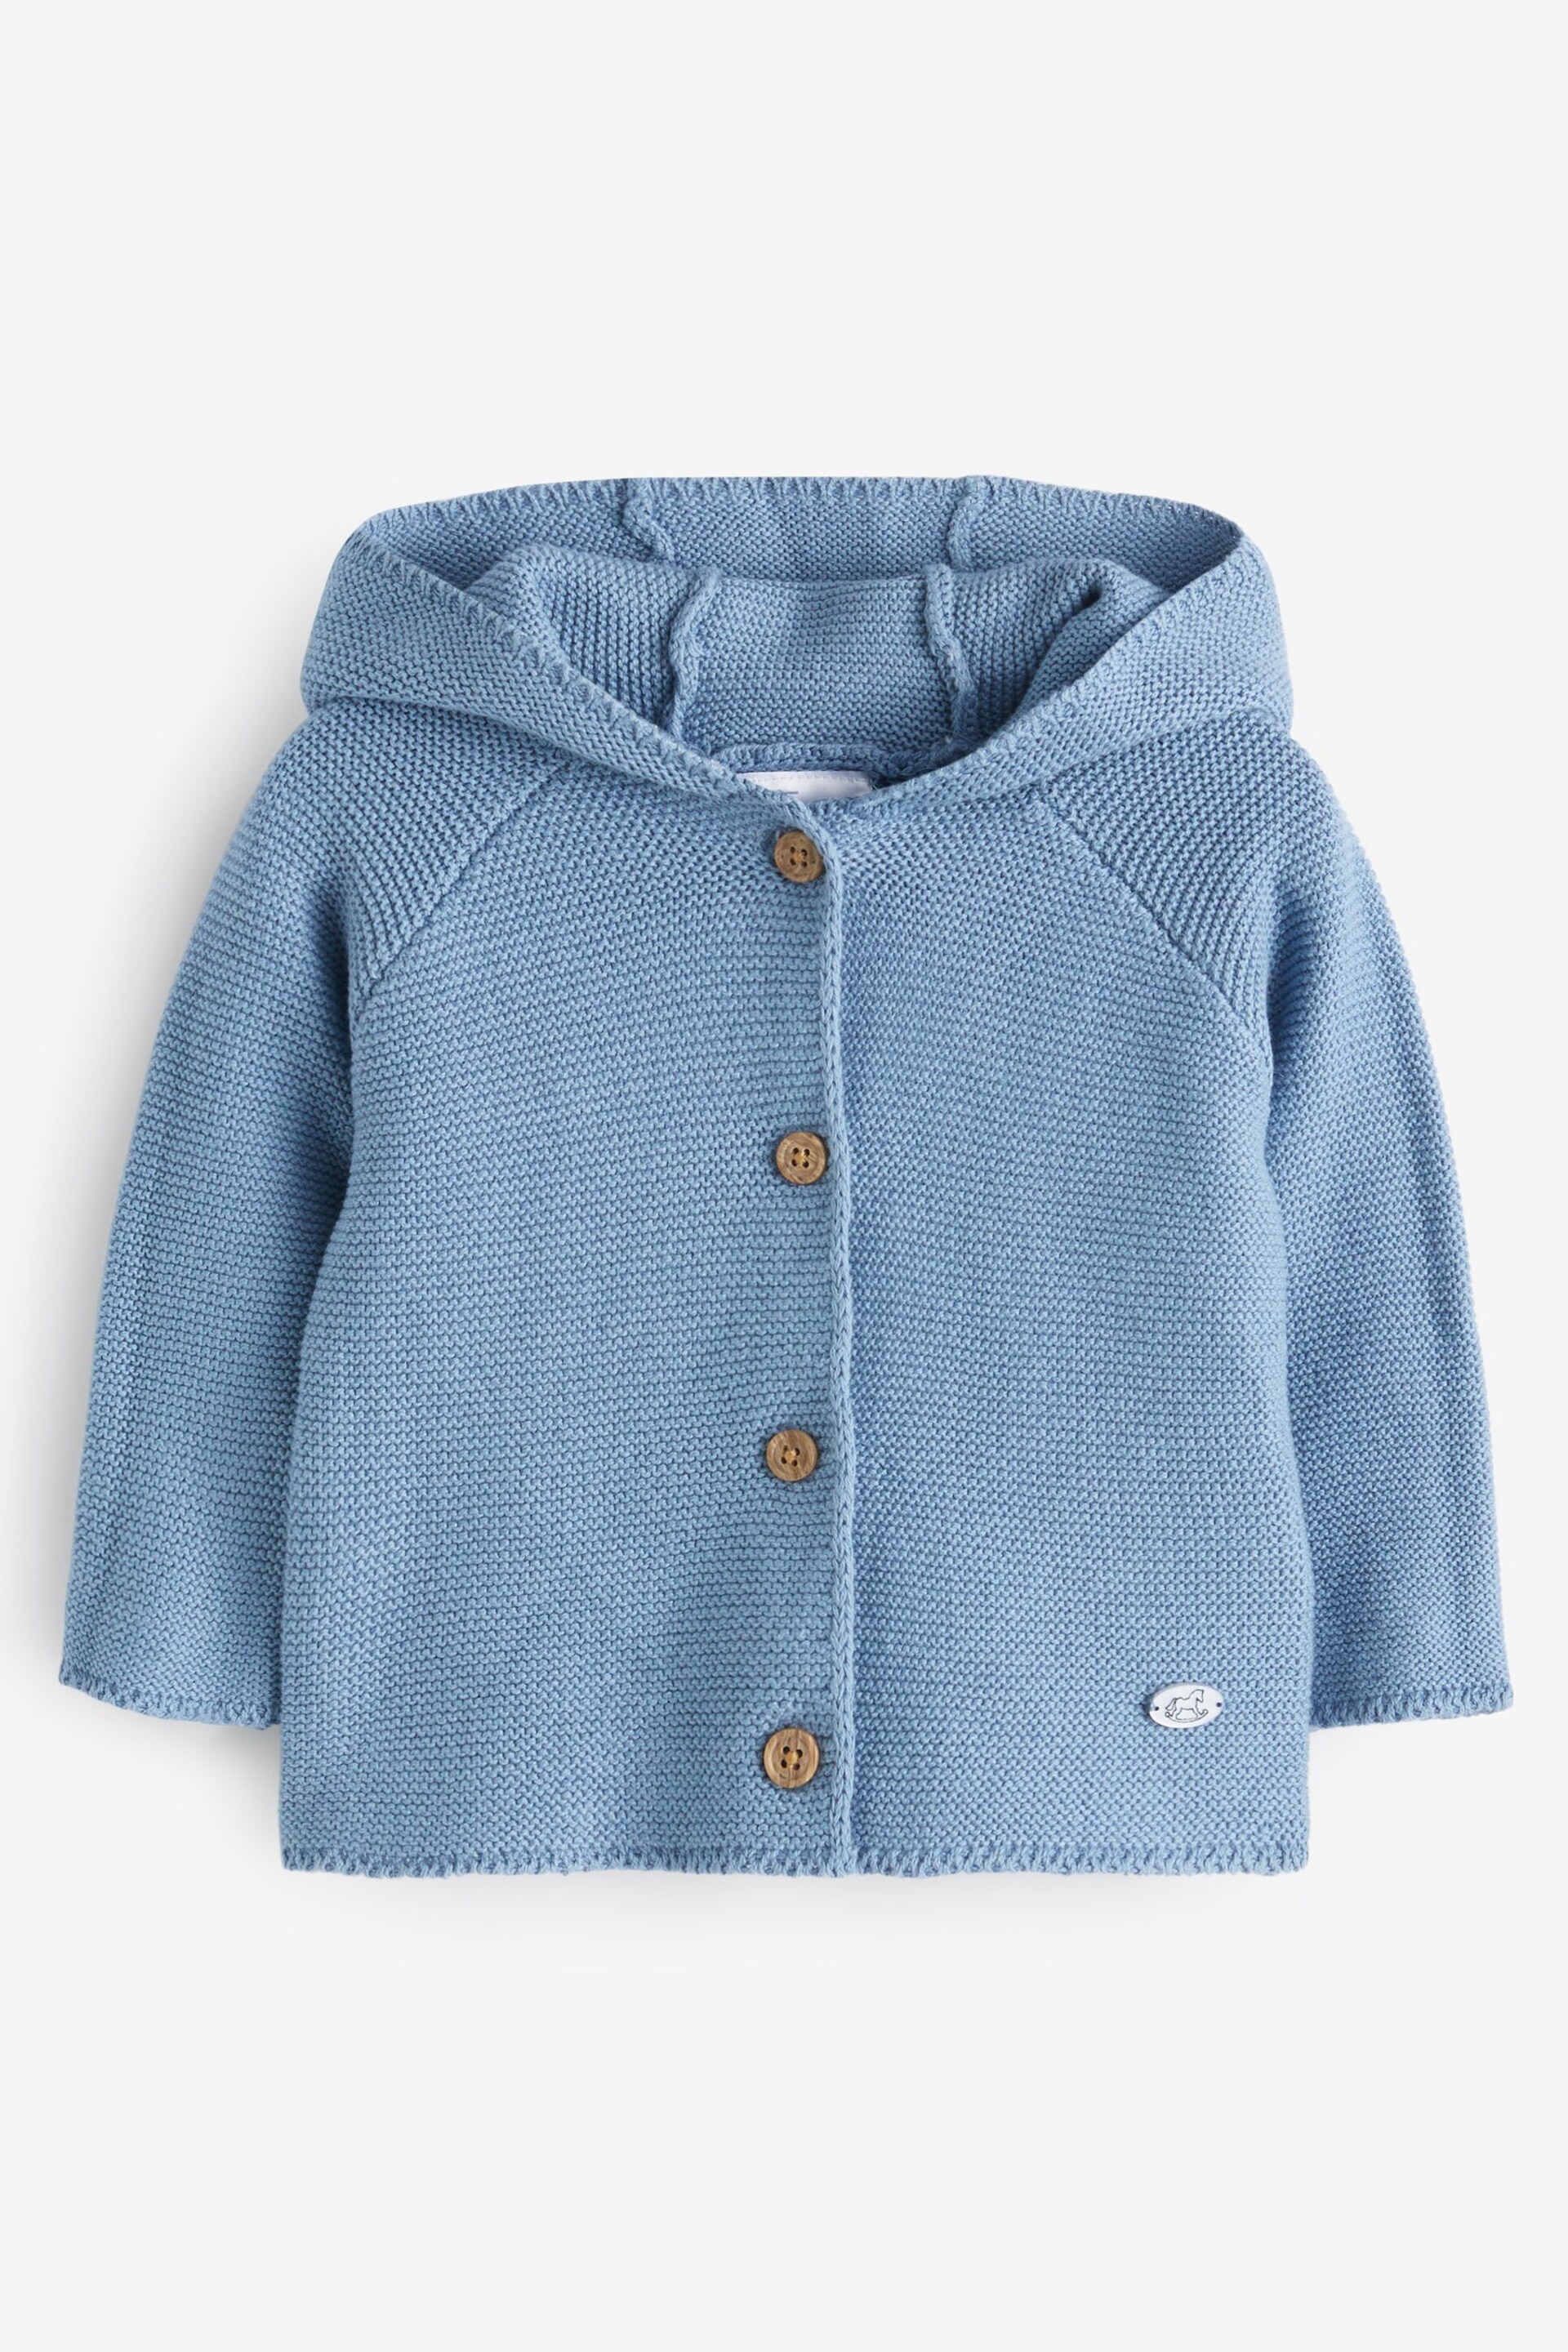 Rock-A-Bye Baby Blue Boutique Hooded Bear Cotton Knit Cardigan - Image 2 of 2